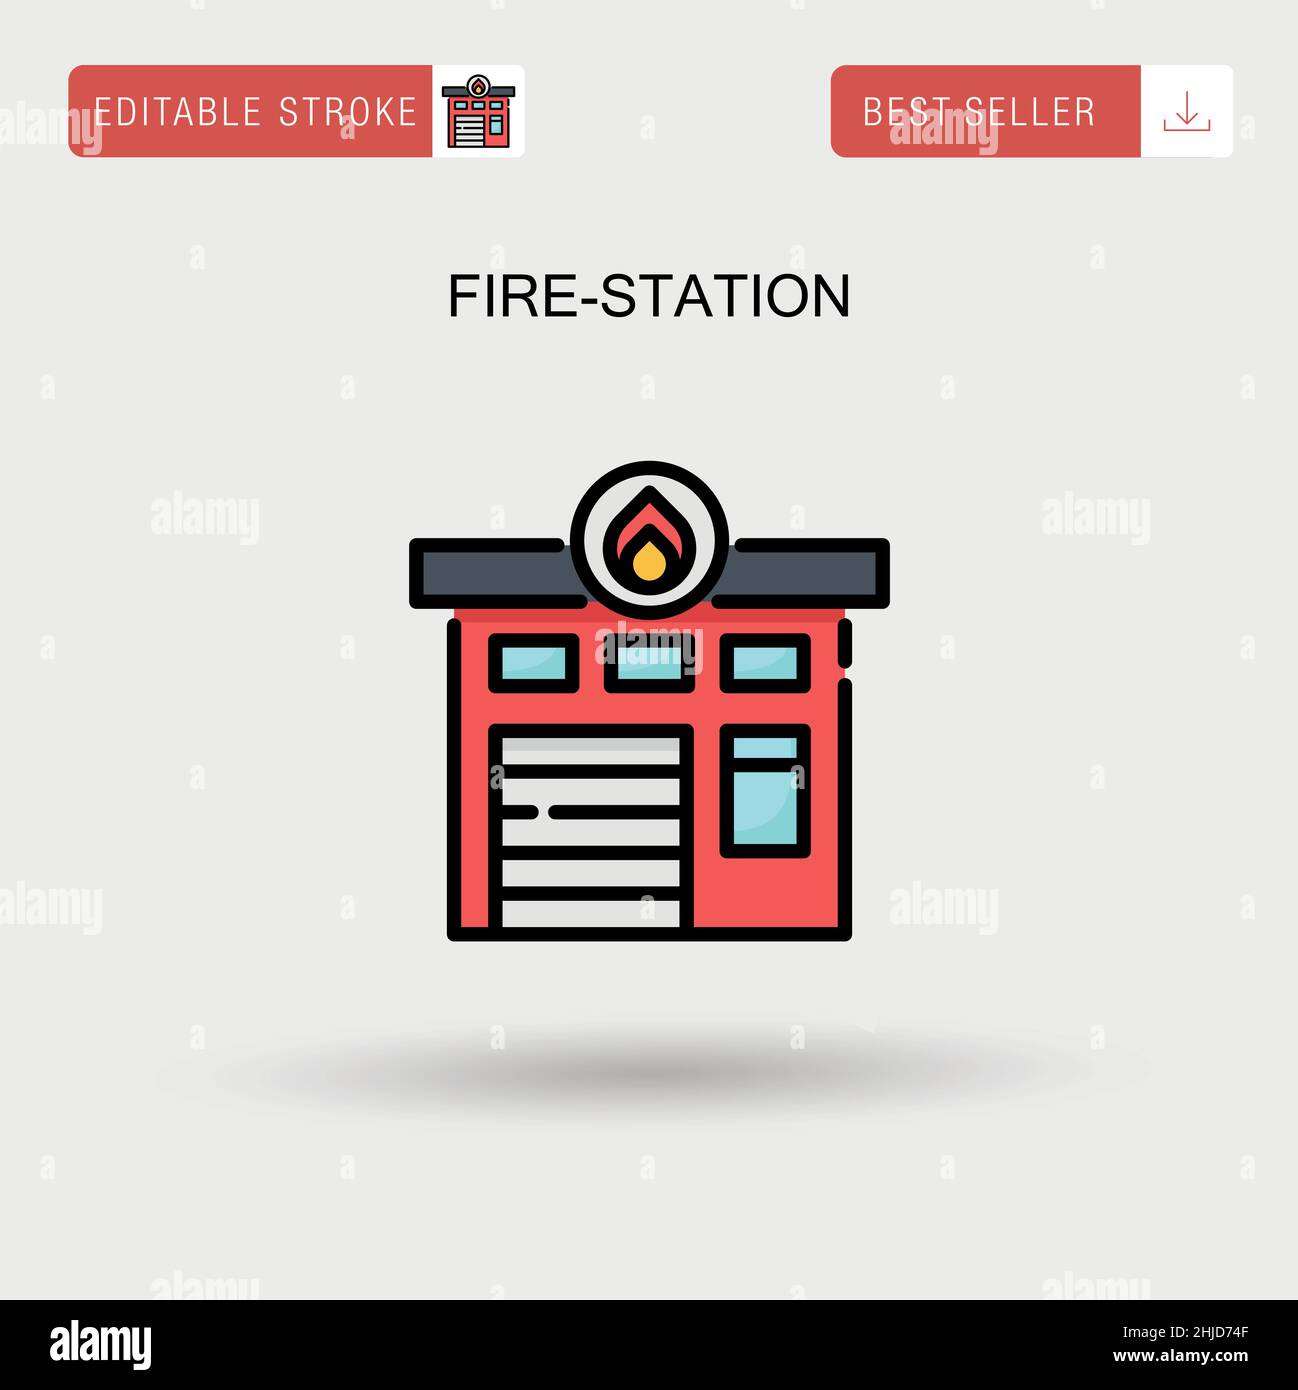 Fire-station Simple vector icon. Stock Vector